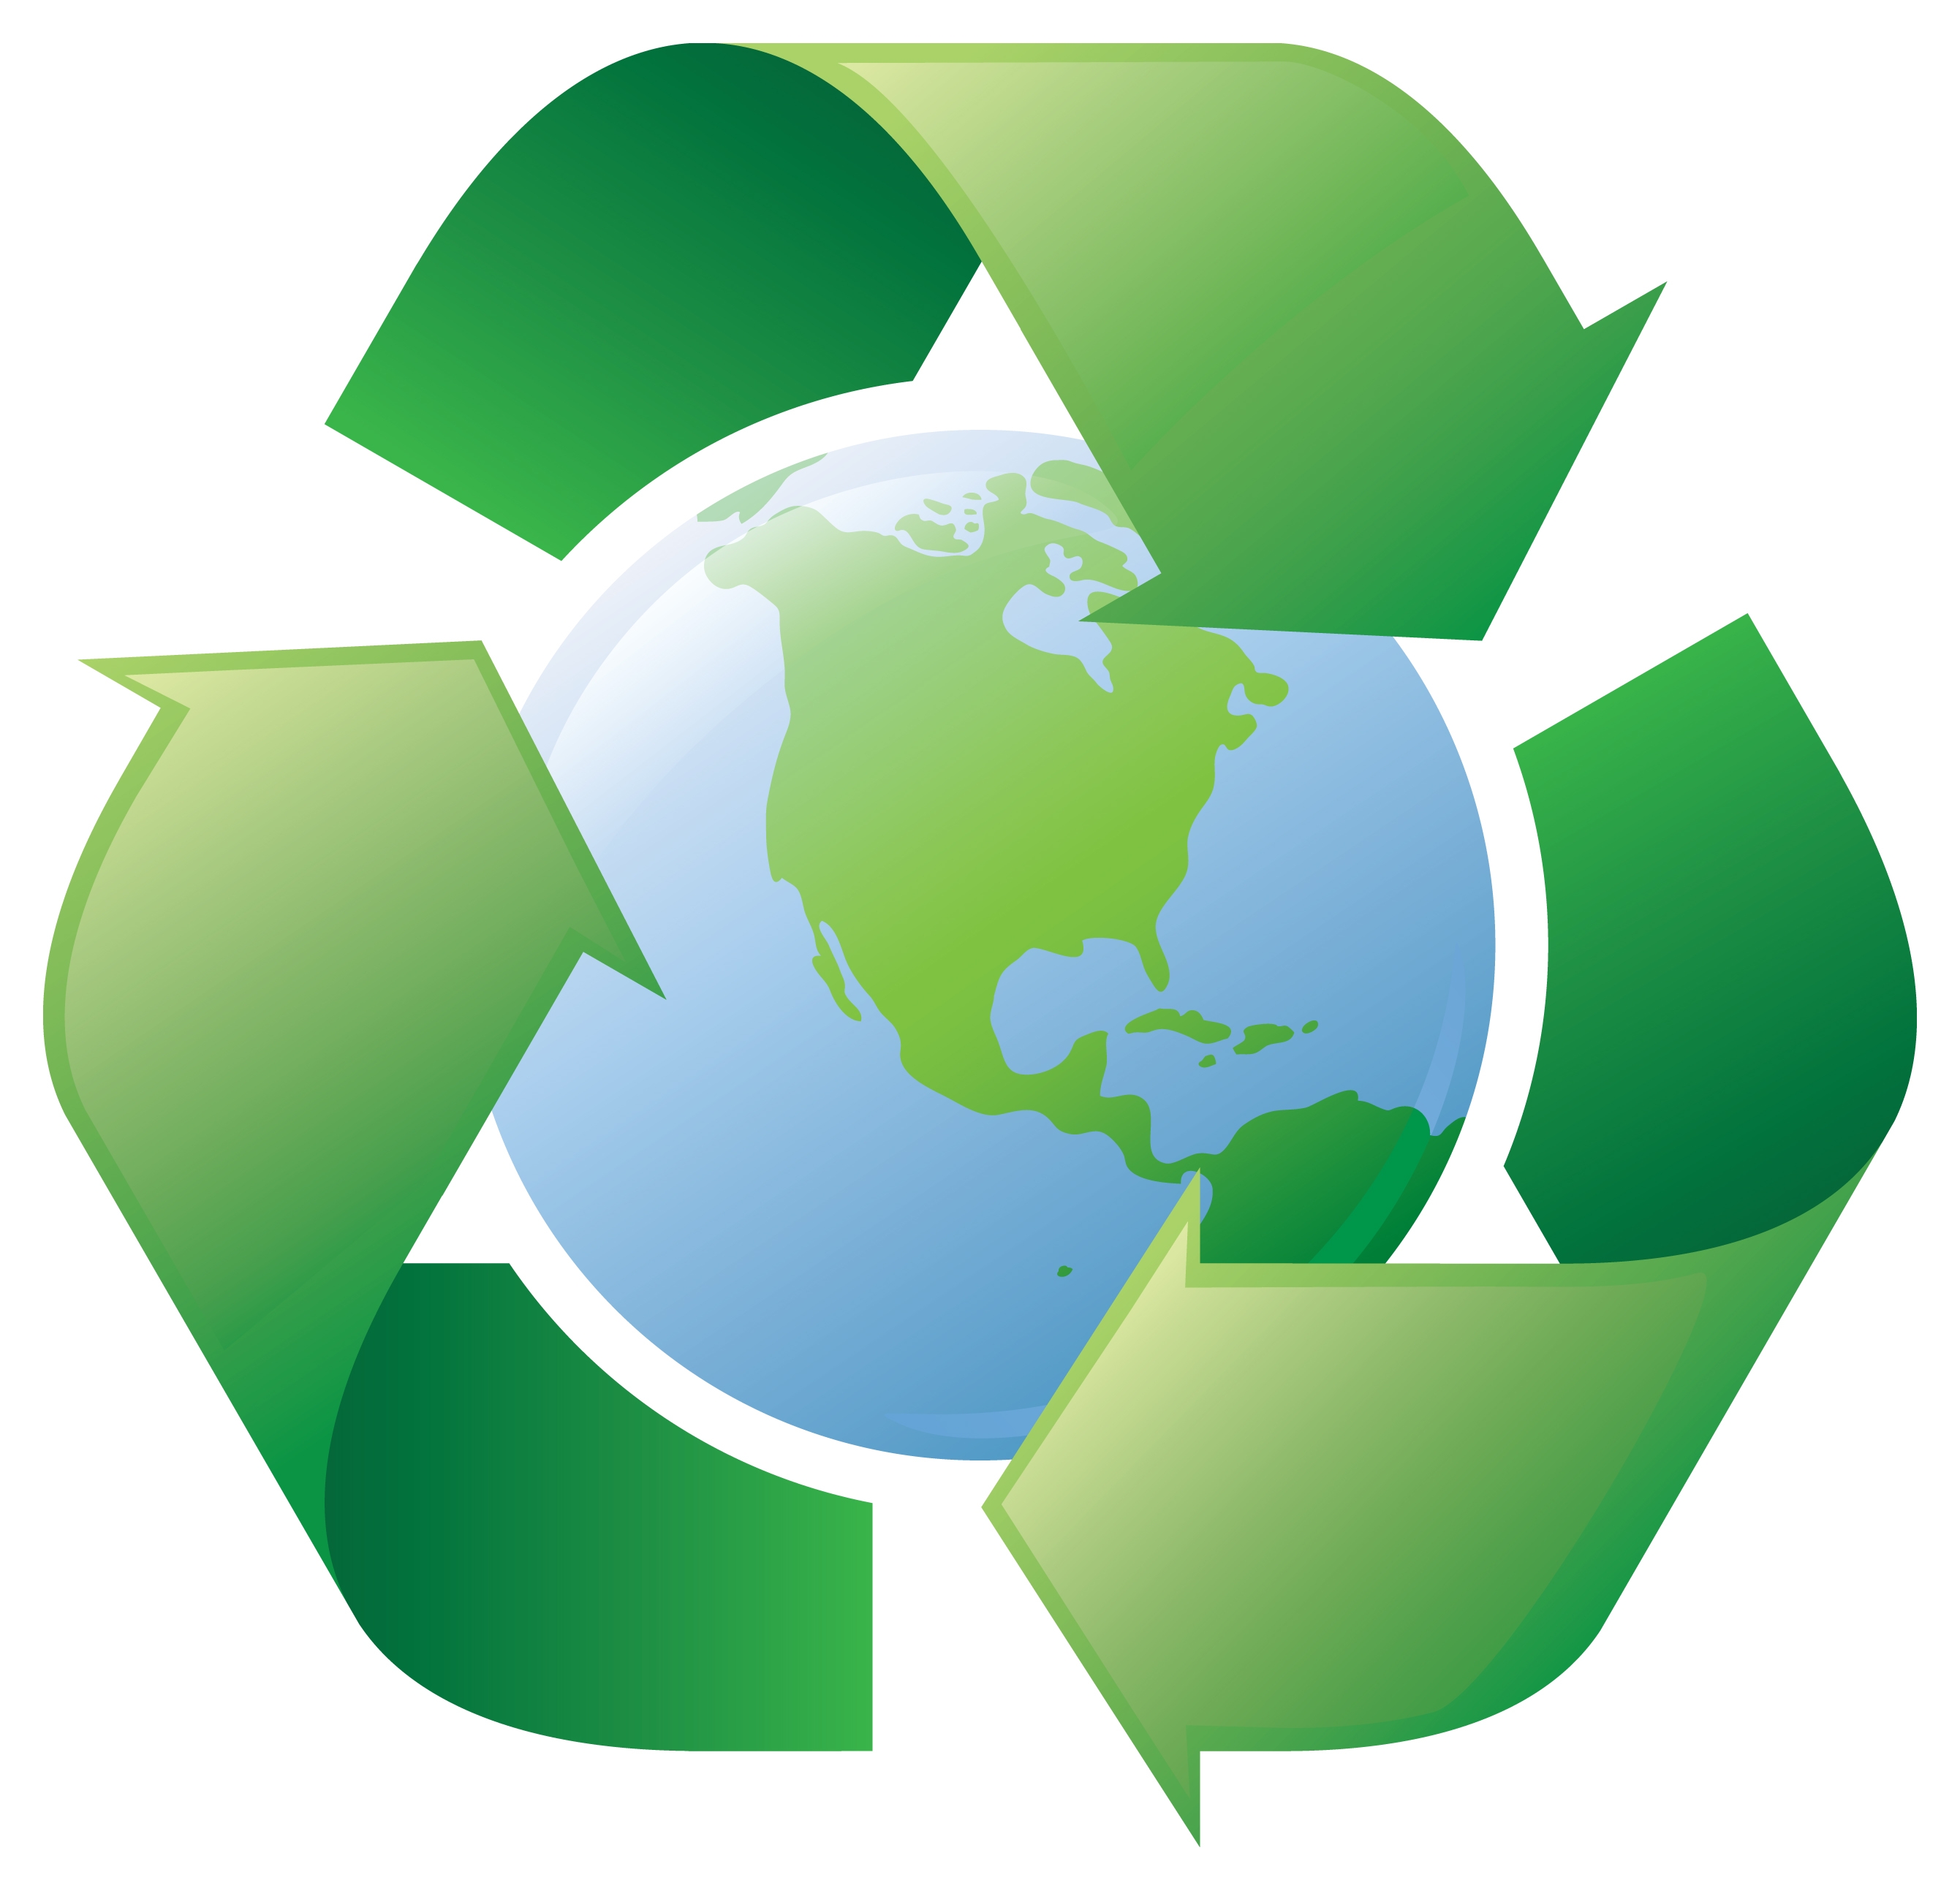 aim-to-recycle-recycling-waste-management-environmental-work